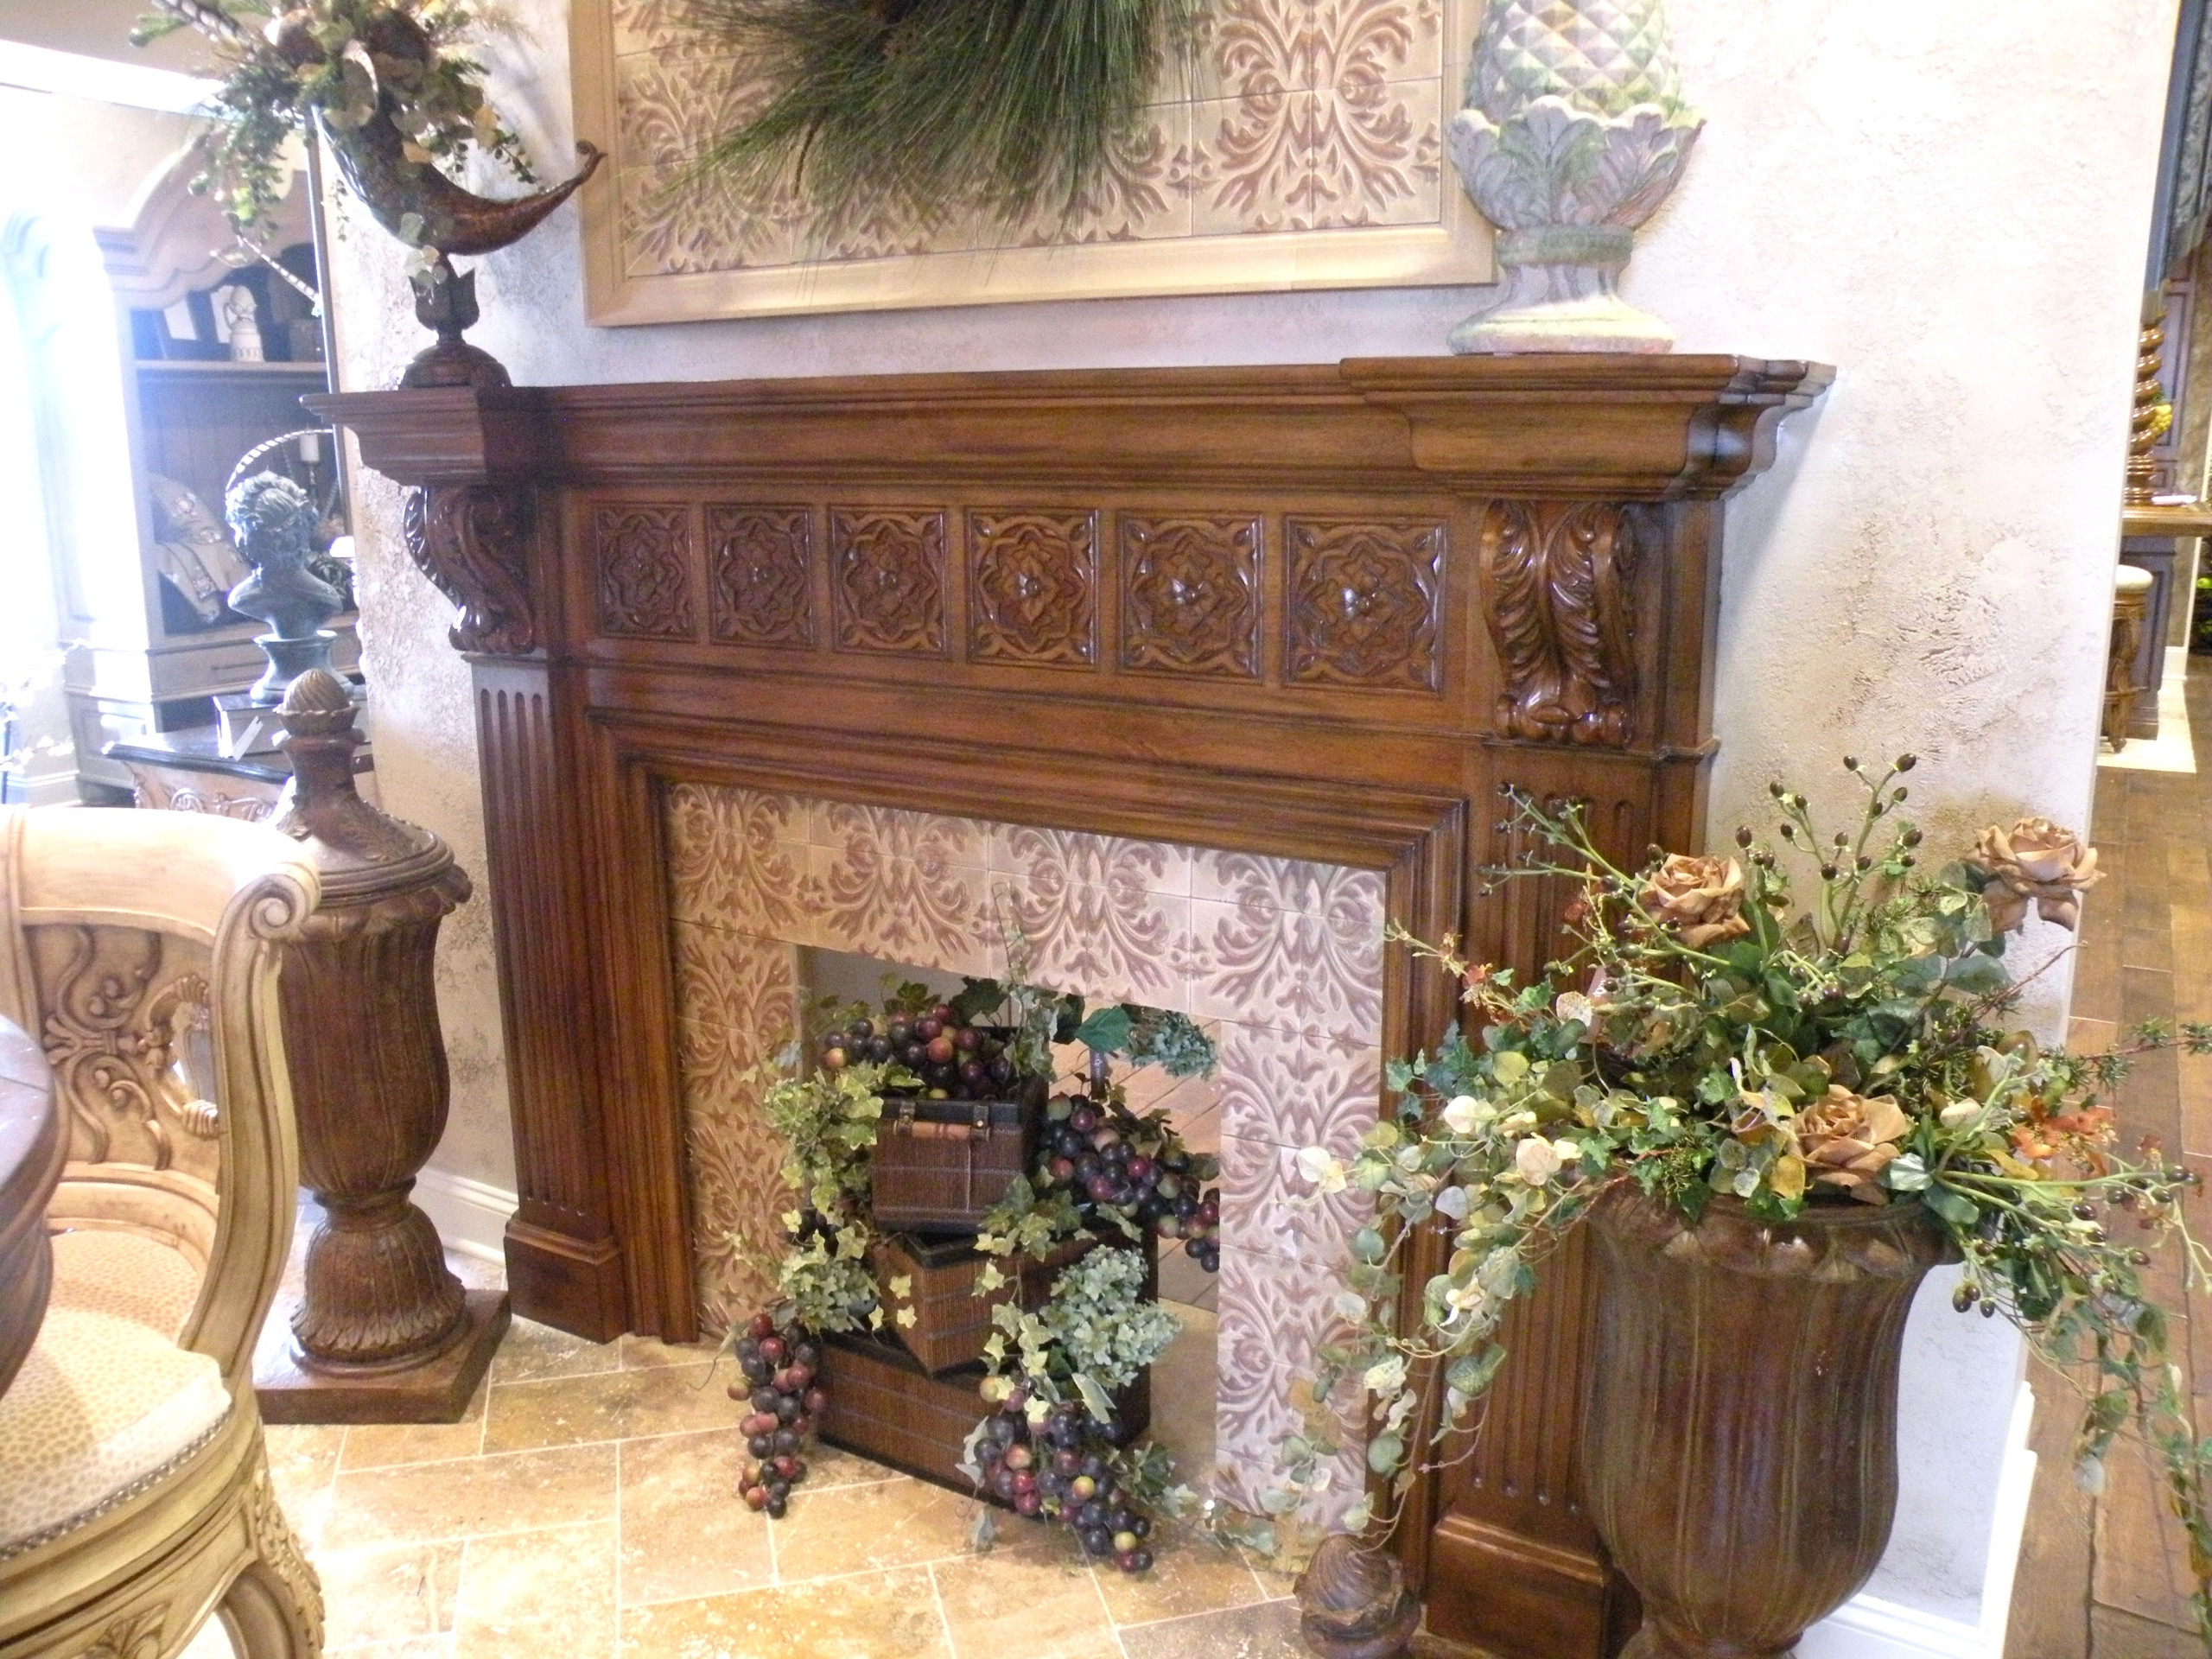 Fireplace Mantles/Surrounds